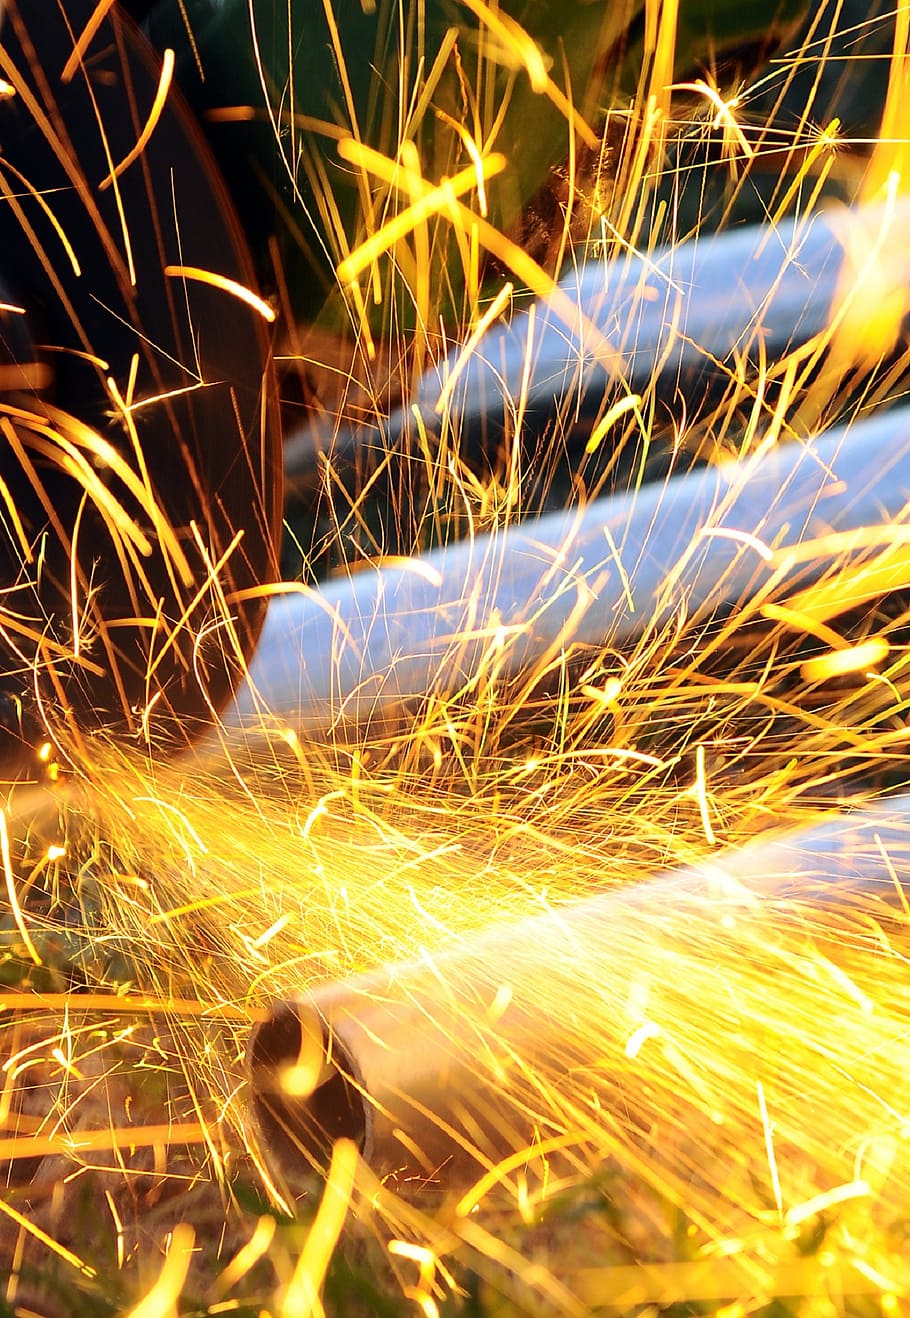 steel wire photography, sparks, construction, worker, grinding, grinder, industry, metal, military, person